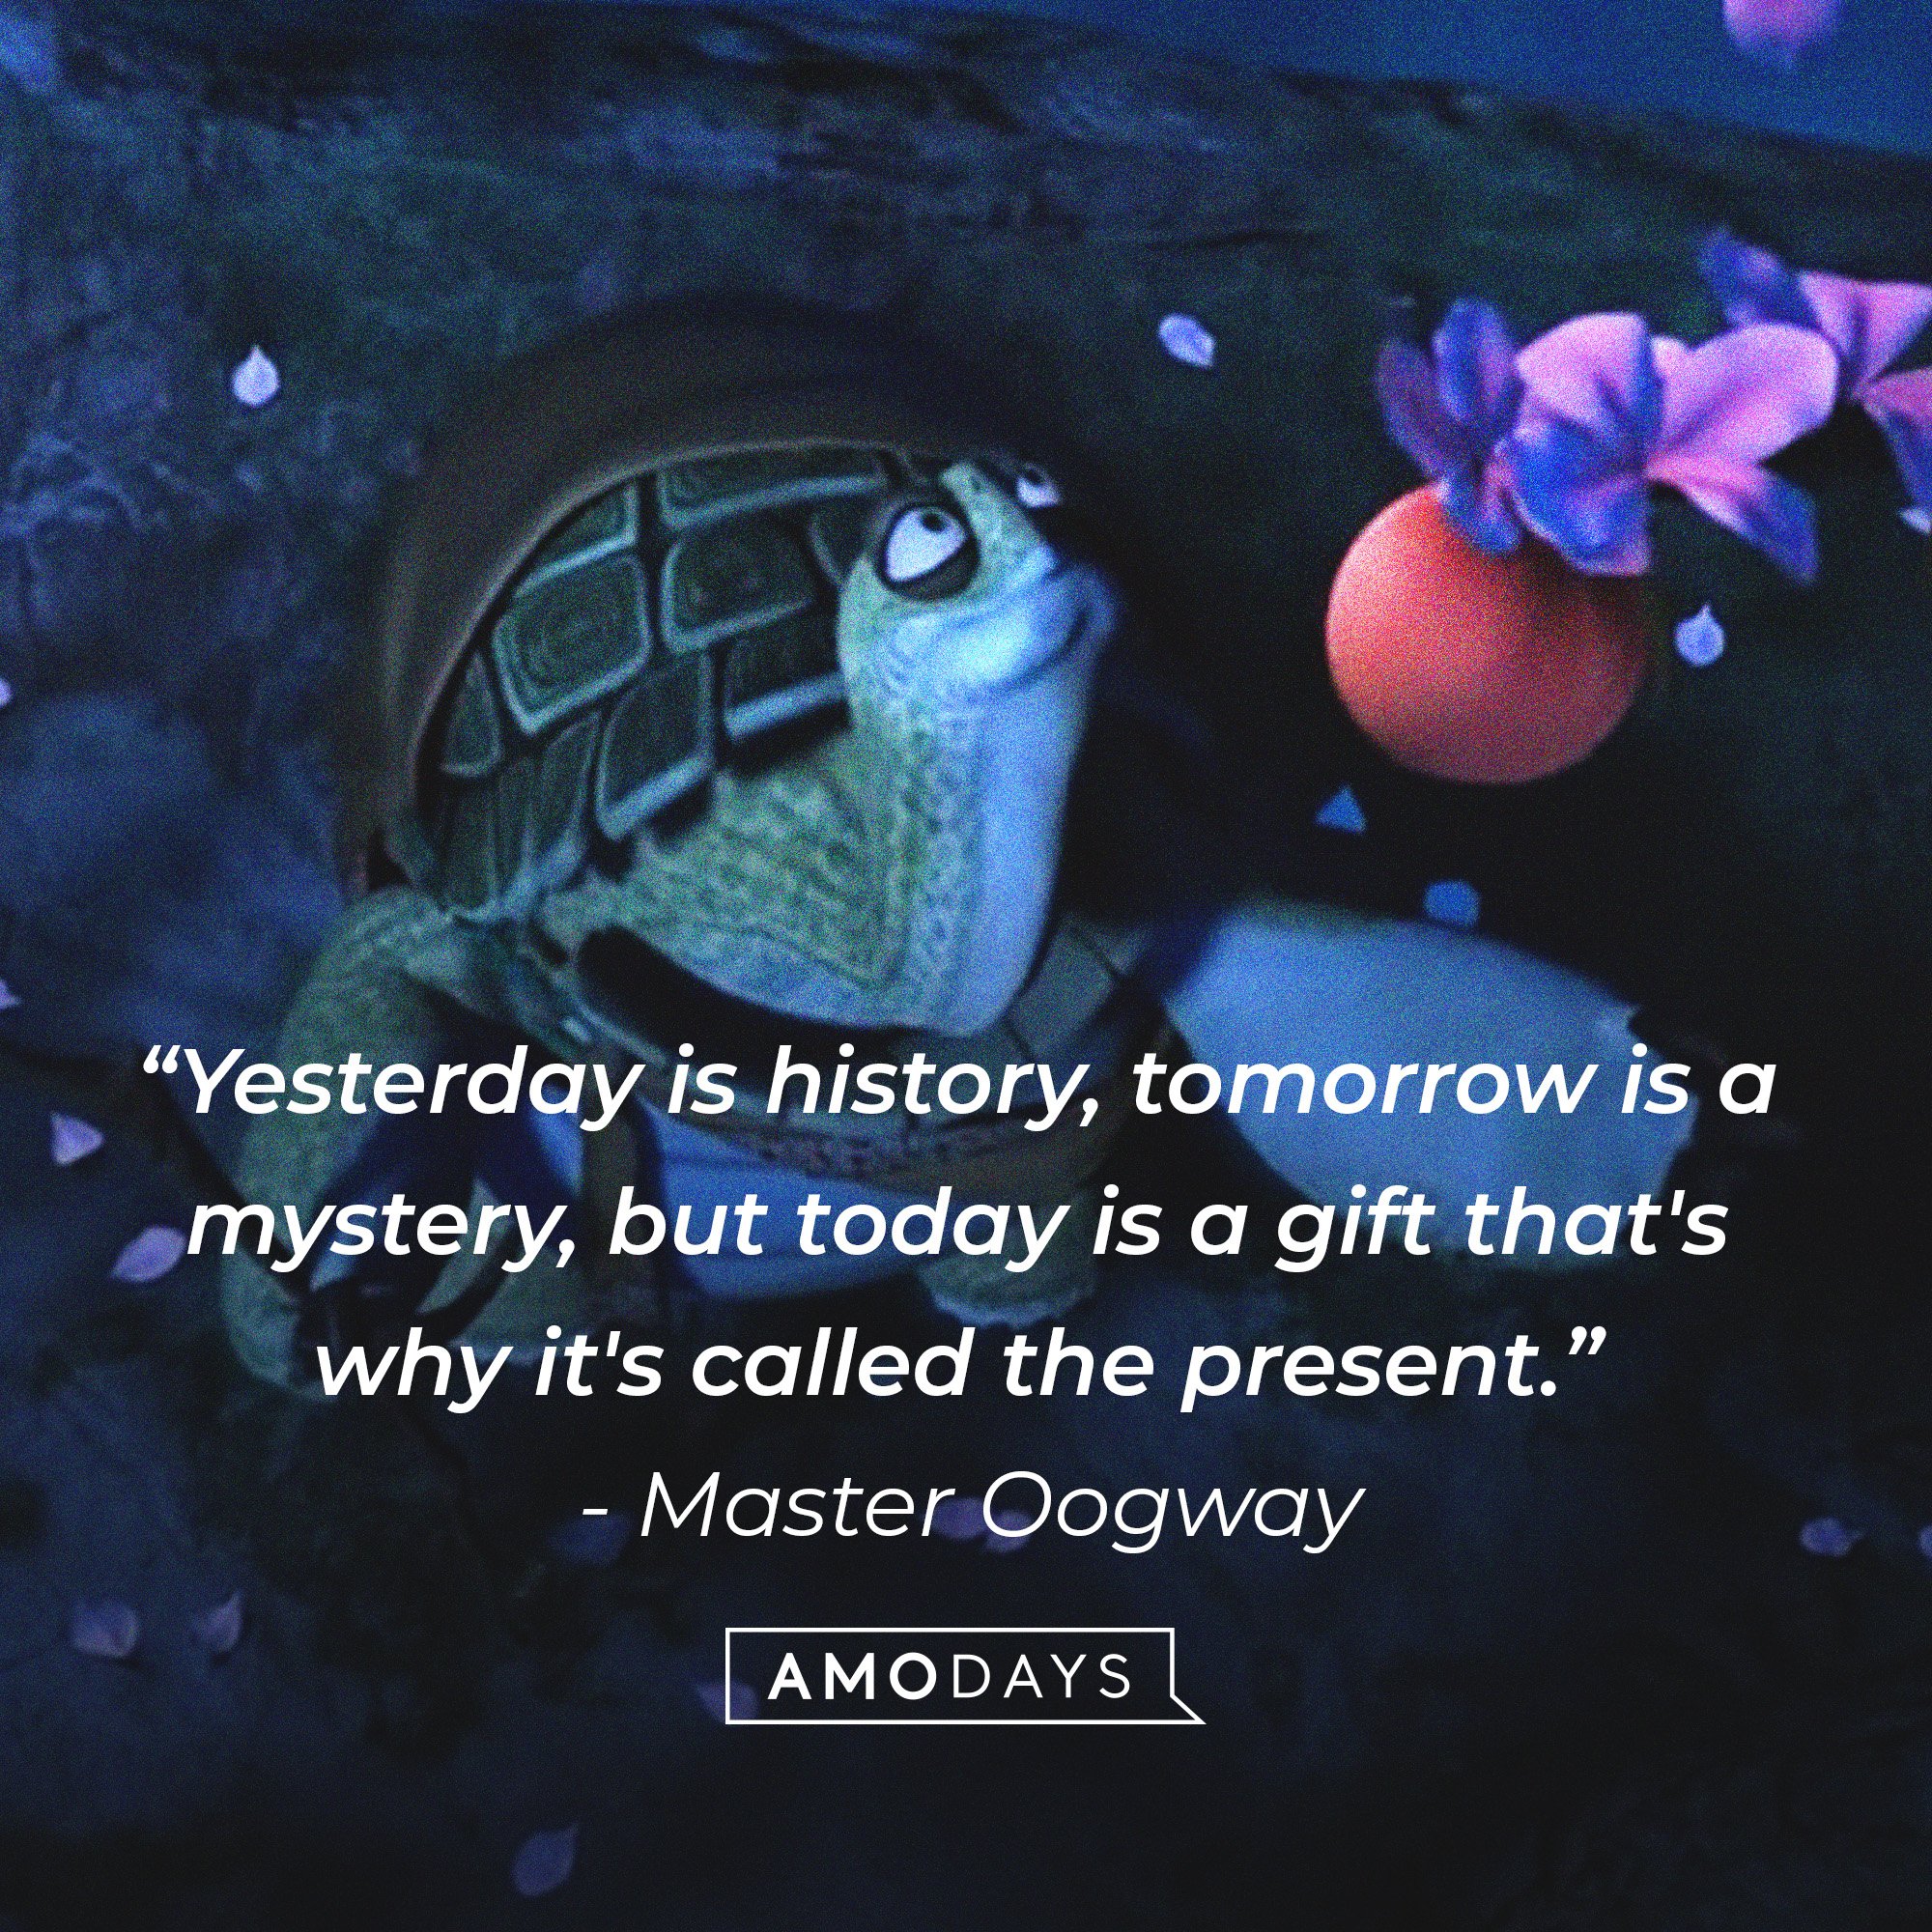 Master Oogway’s quote: “Yesterday is history, tomorrow is a mystery, but today is a gift that's why it's called the present.” | Image: AmoDays